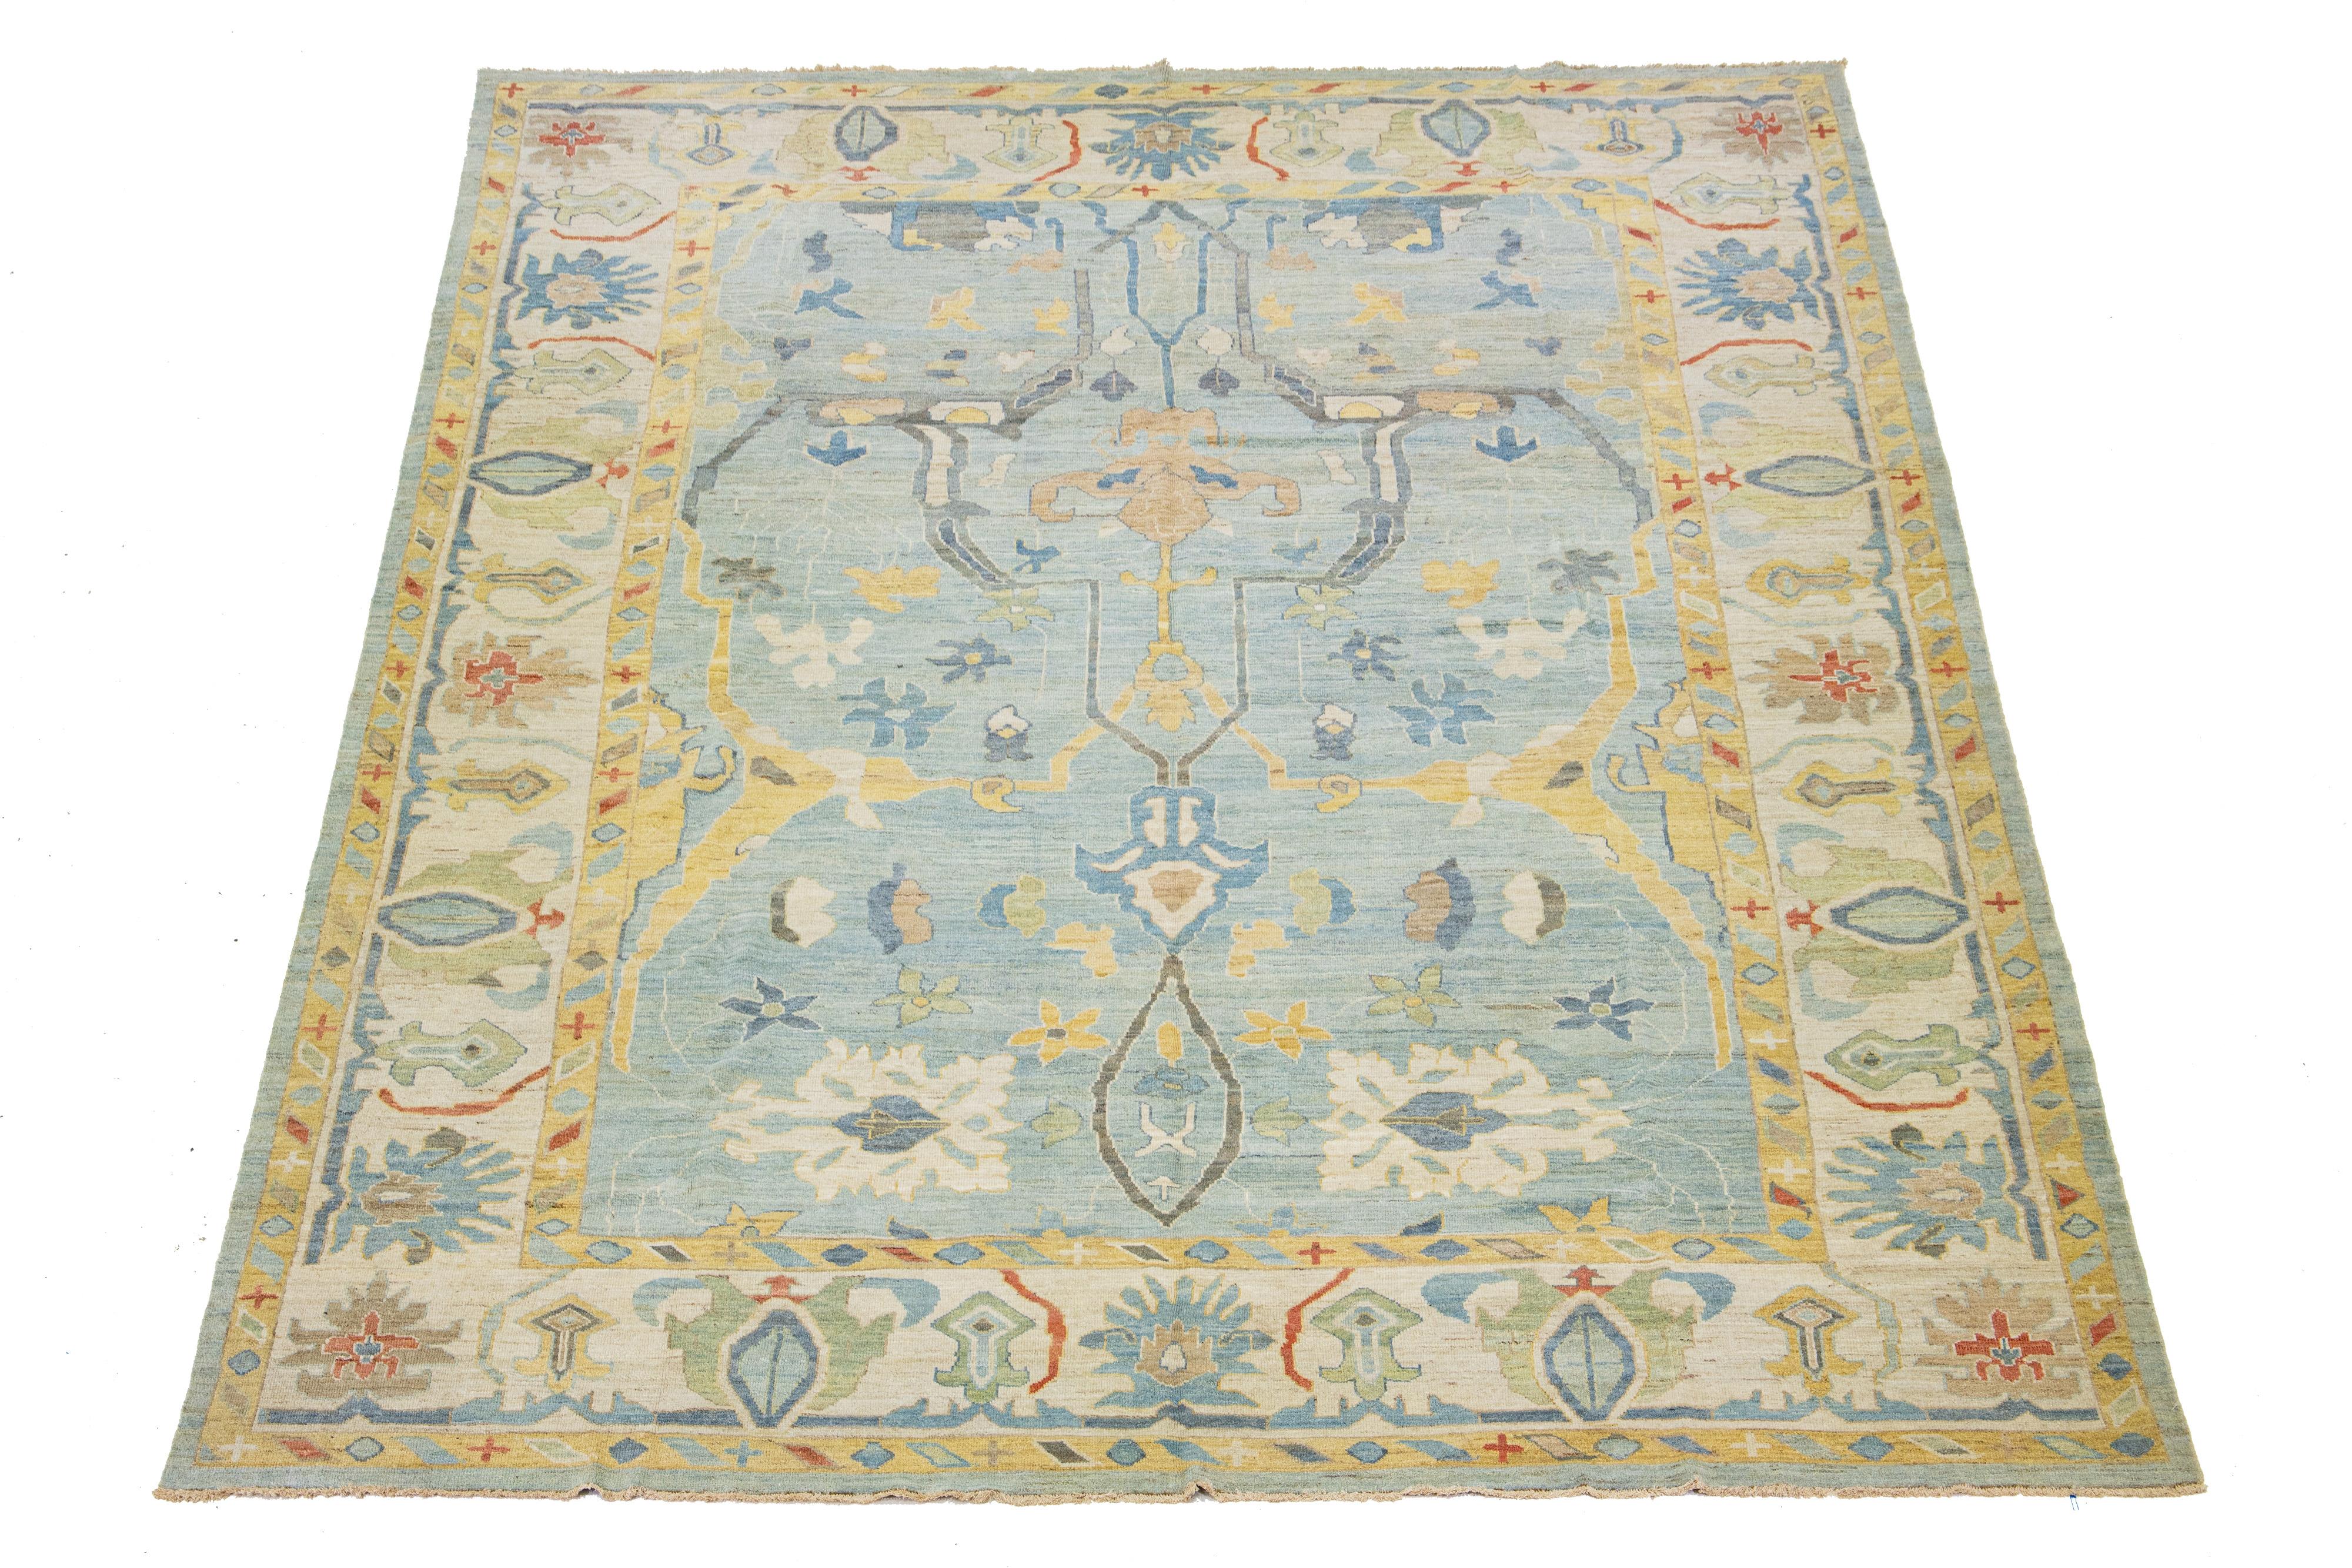 Beautiful modern Sultanabad hand-knotted wool rug with a light blue field. This Sultanabad rug has multicolor accents in a gorgeous all-over classic floral pattern design.

This rug measures 12' x 15'2